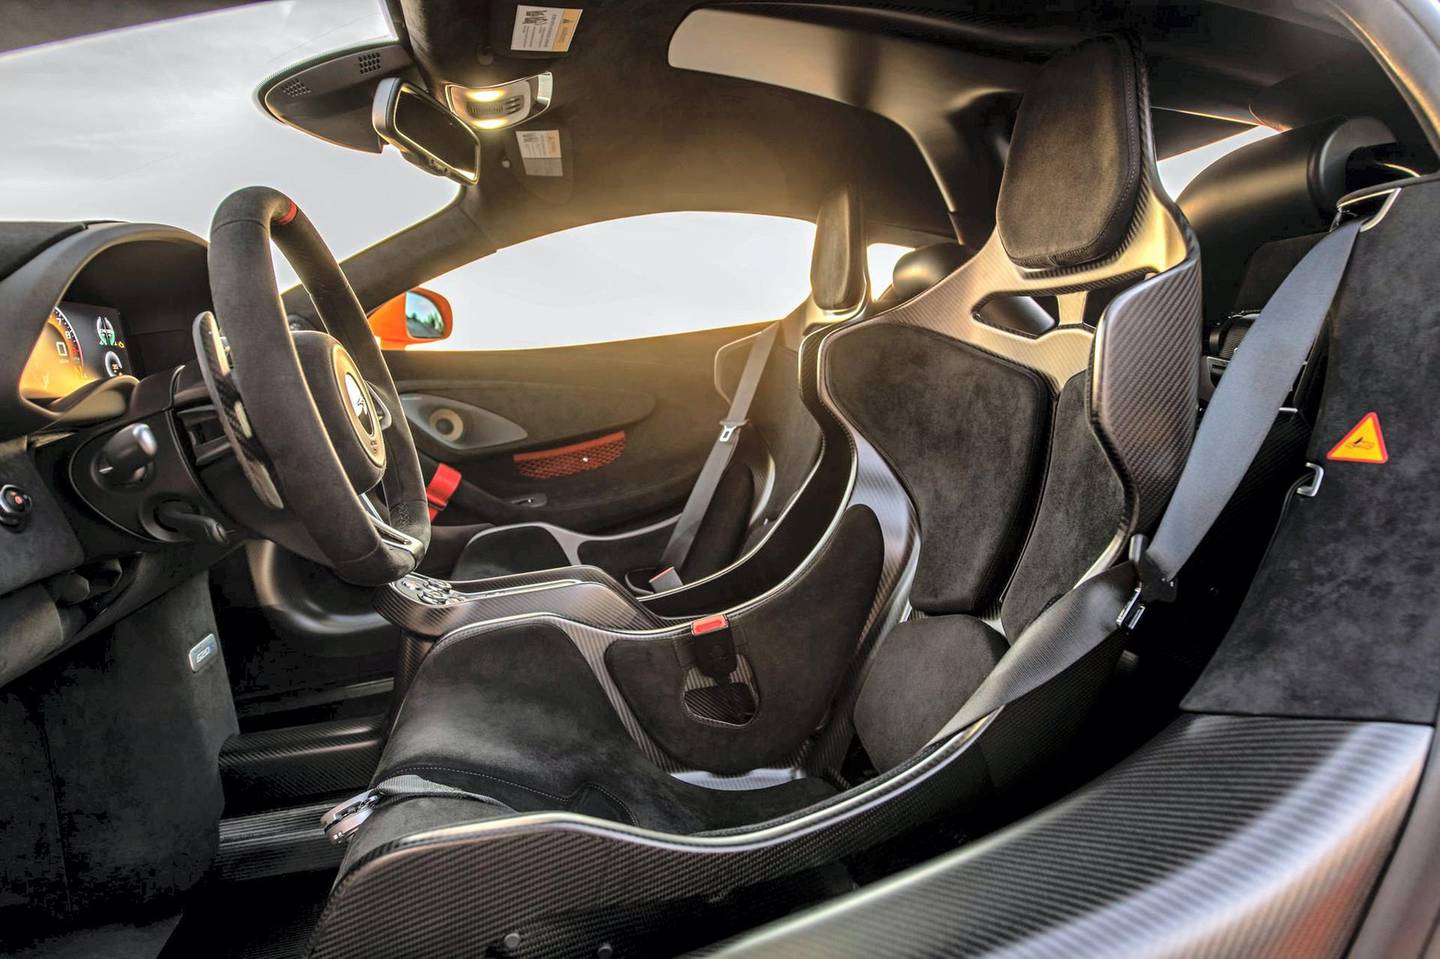 The cabin is fitted with a six-point race harness, although it also has regular three-pointed seat belts for daily use 